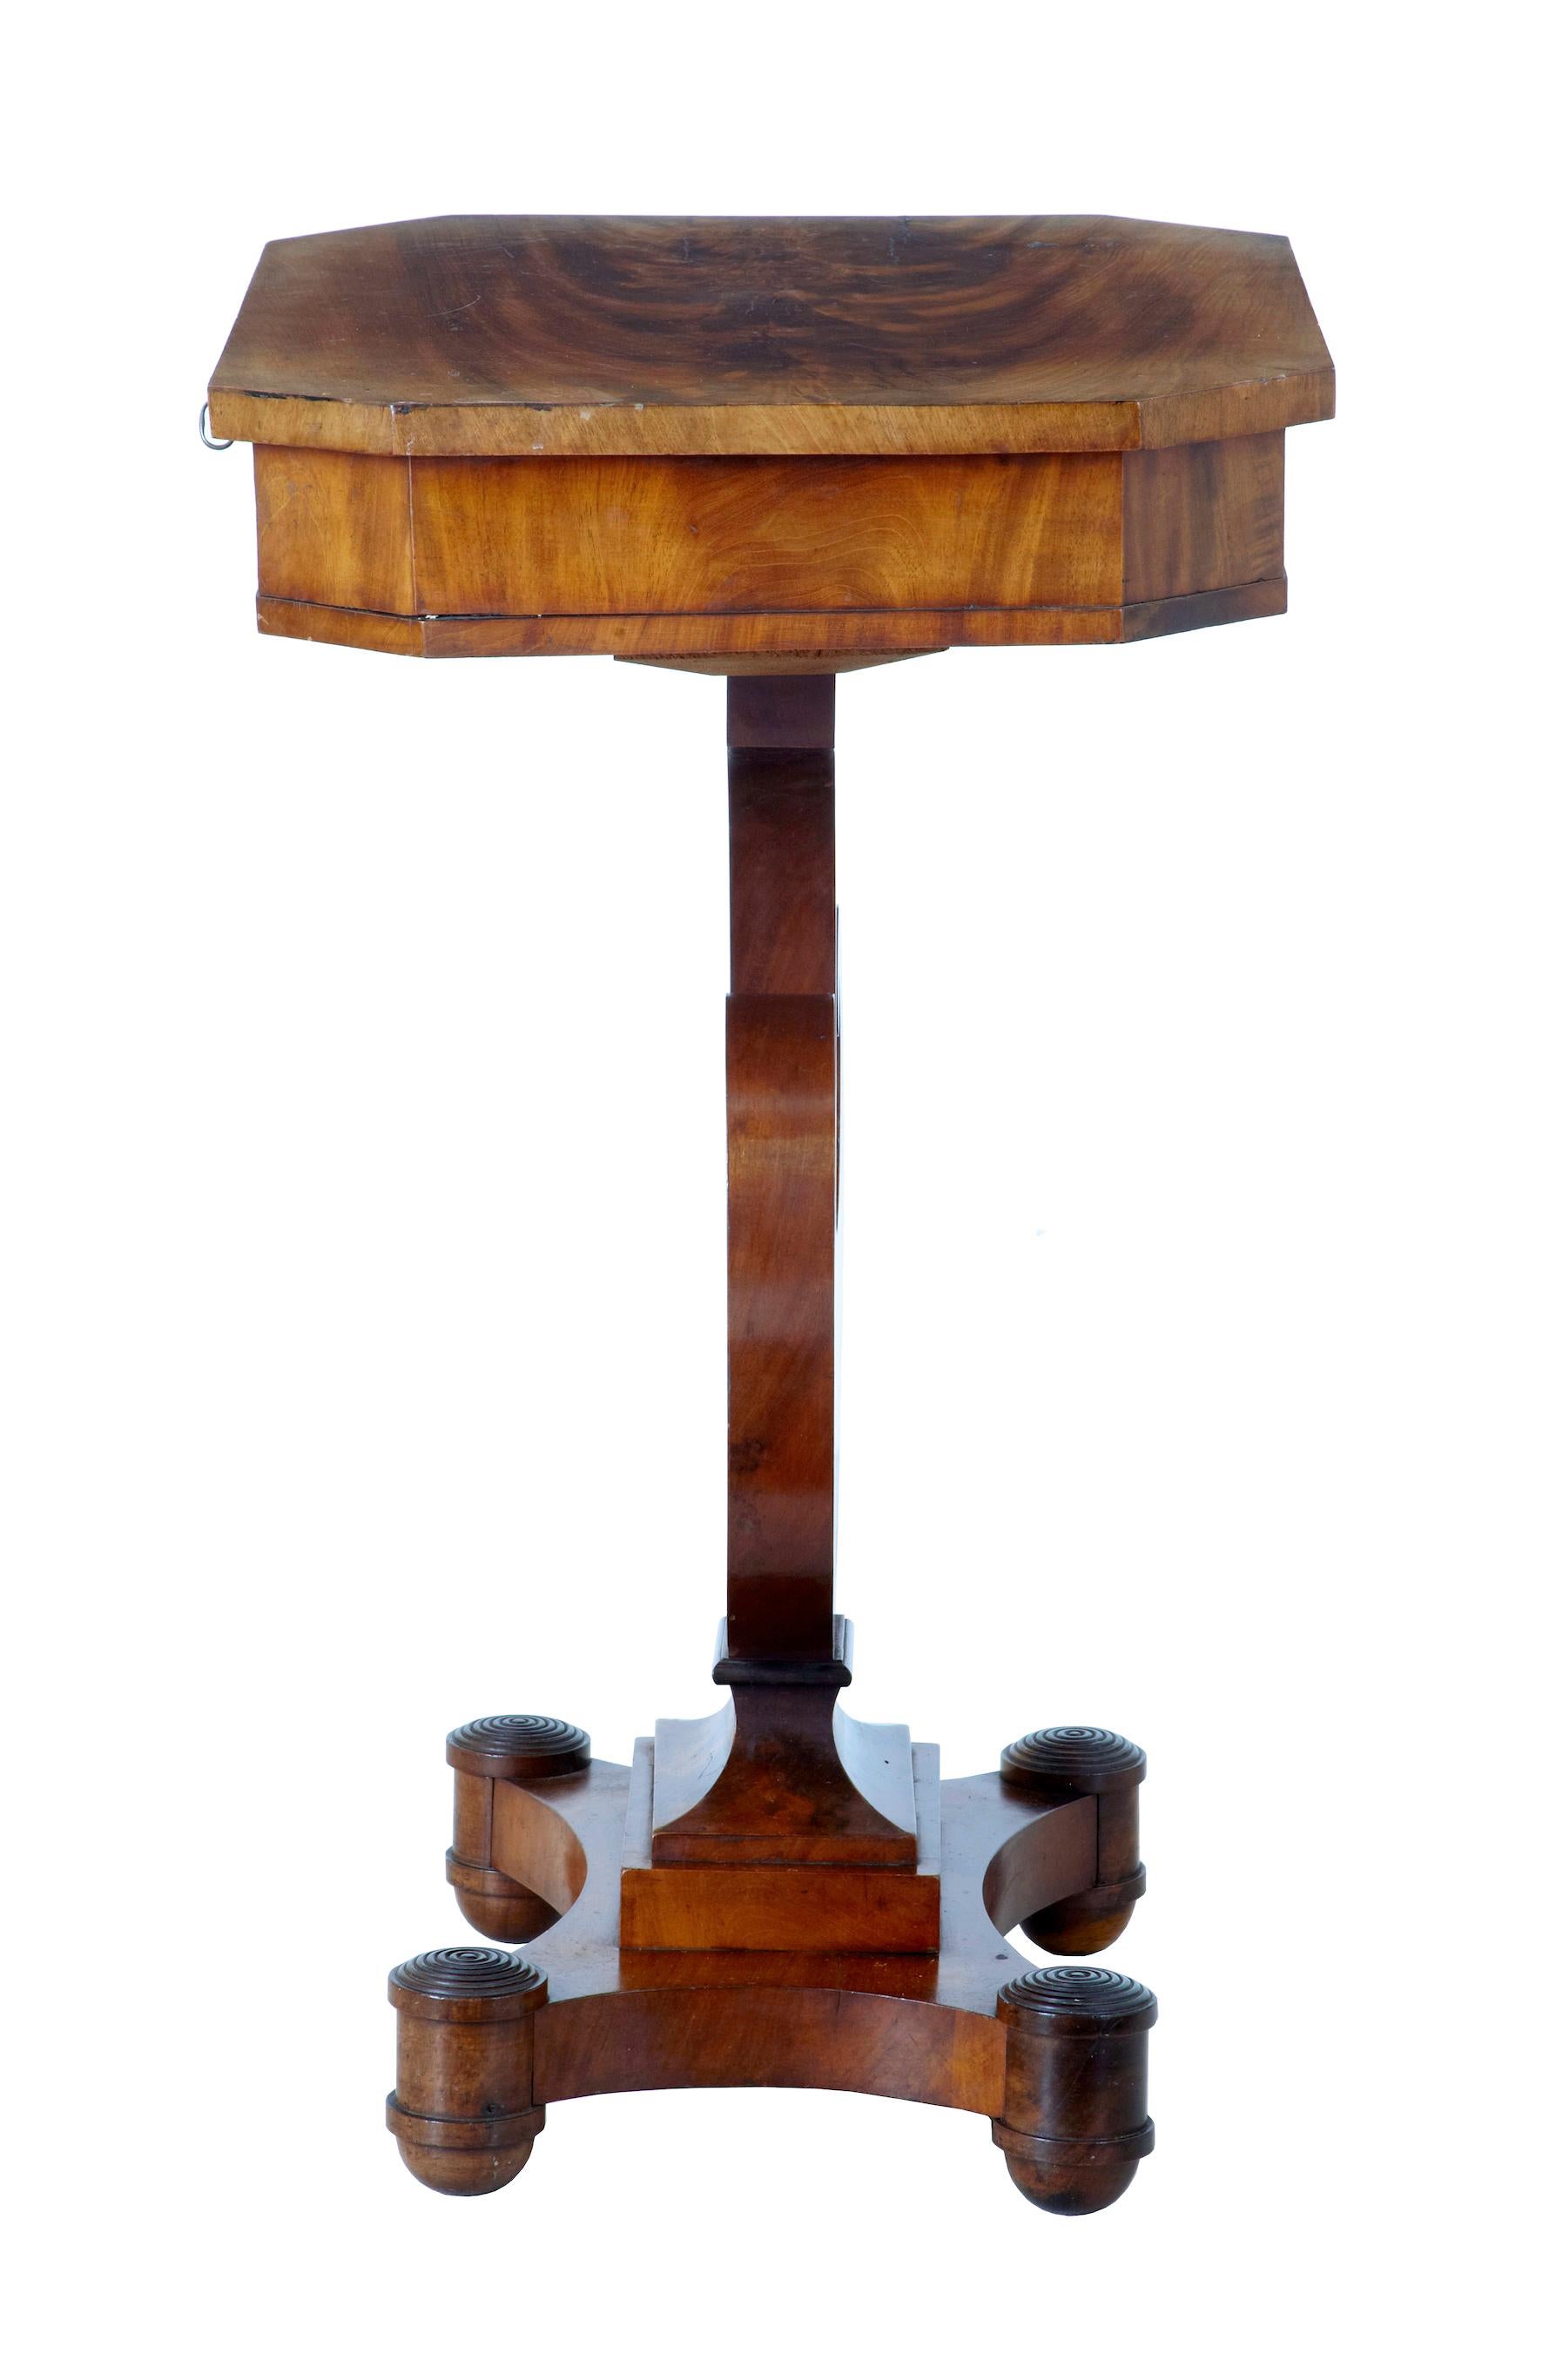 19th century flame mahogany lyre form sewing table, circa 1860.

Fine quality 19th century mahogany work table, circa 1860. Shaped top with fitted drawer below and hinged pin cushion. Lyre shaped base, standing on quadriform base with roundel